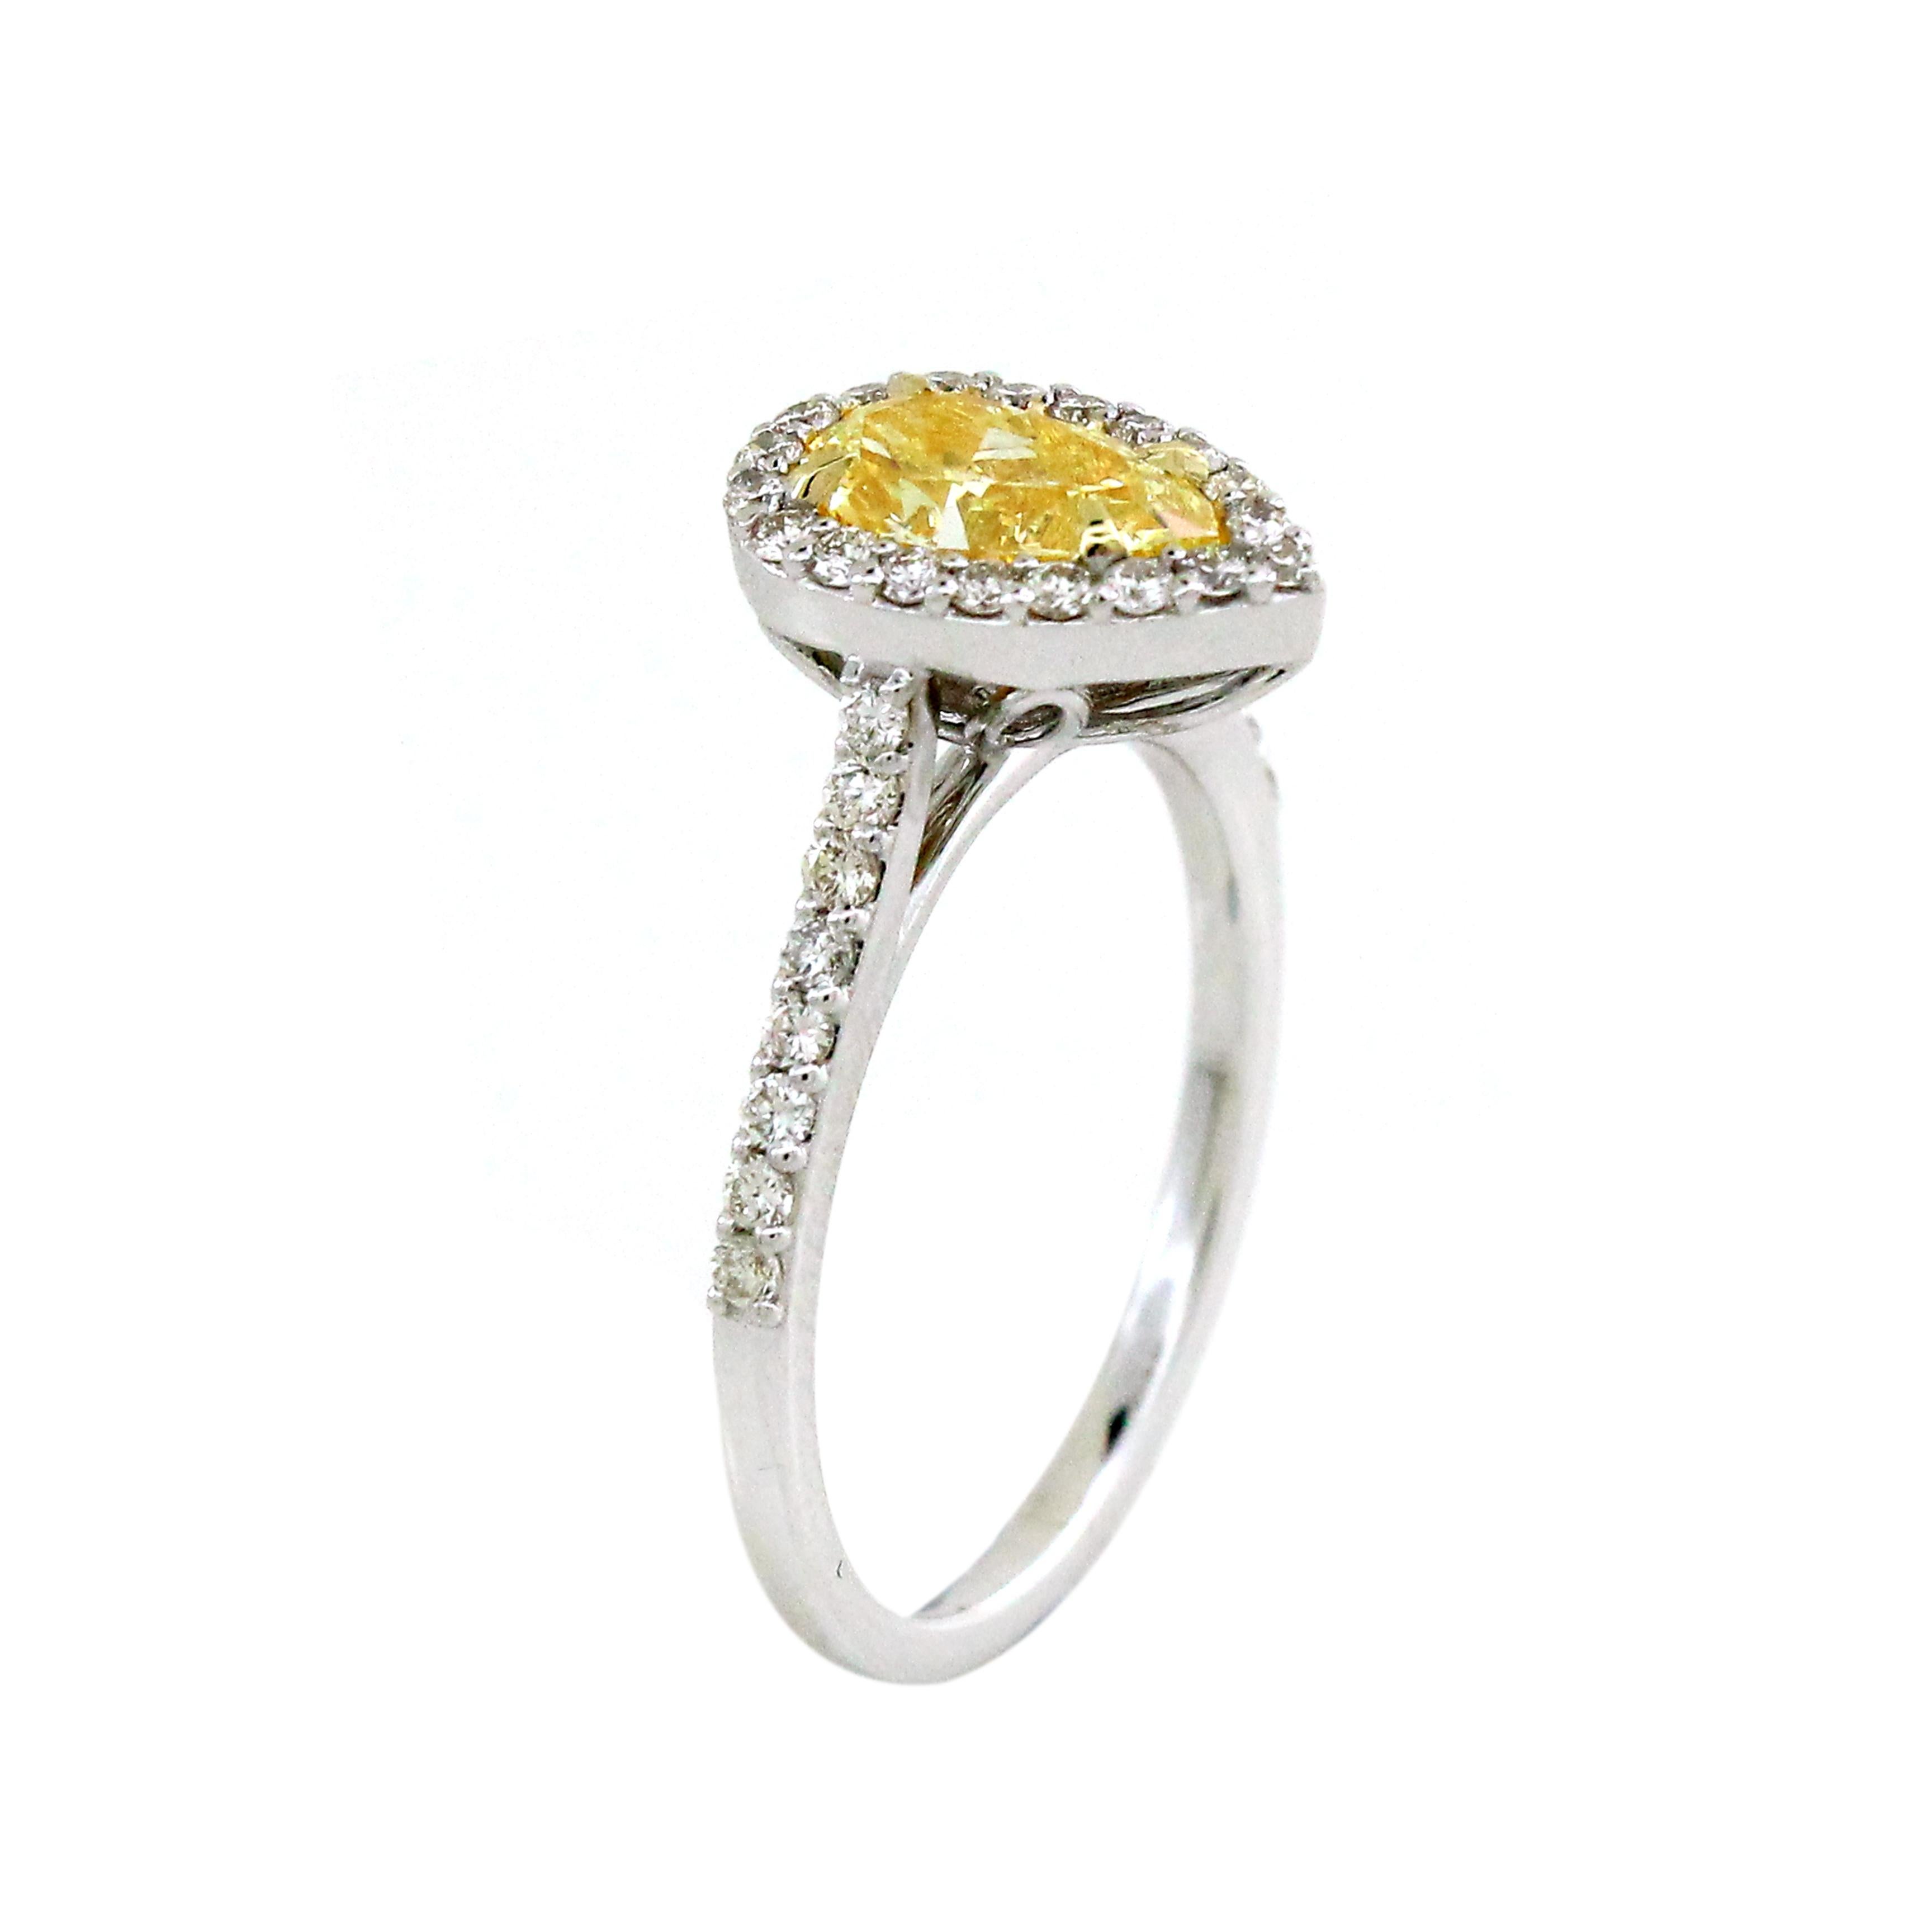 The star of this ring is the striking 1.02-carat yellow pear-cut diamond. Its unique and elegant shape, reminiscent of a teardrop, is perfectly complemented by its radiant yellow hue. Surrounding the yellow diamond are 35 white round diamonds,